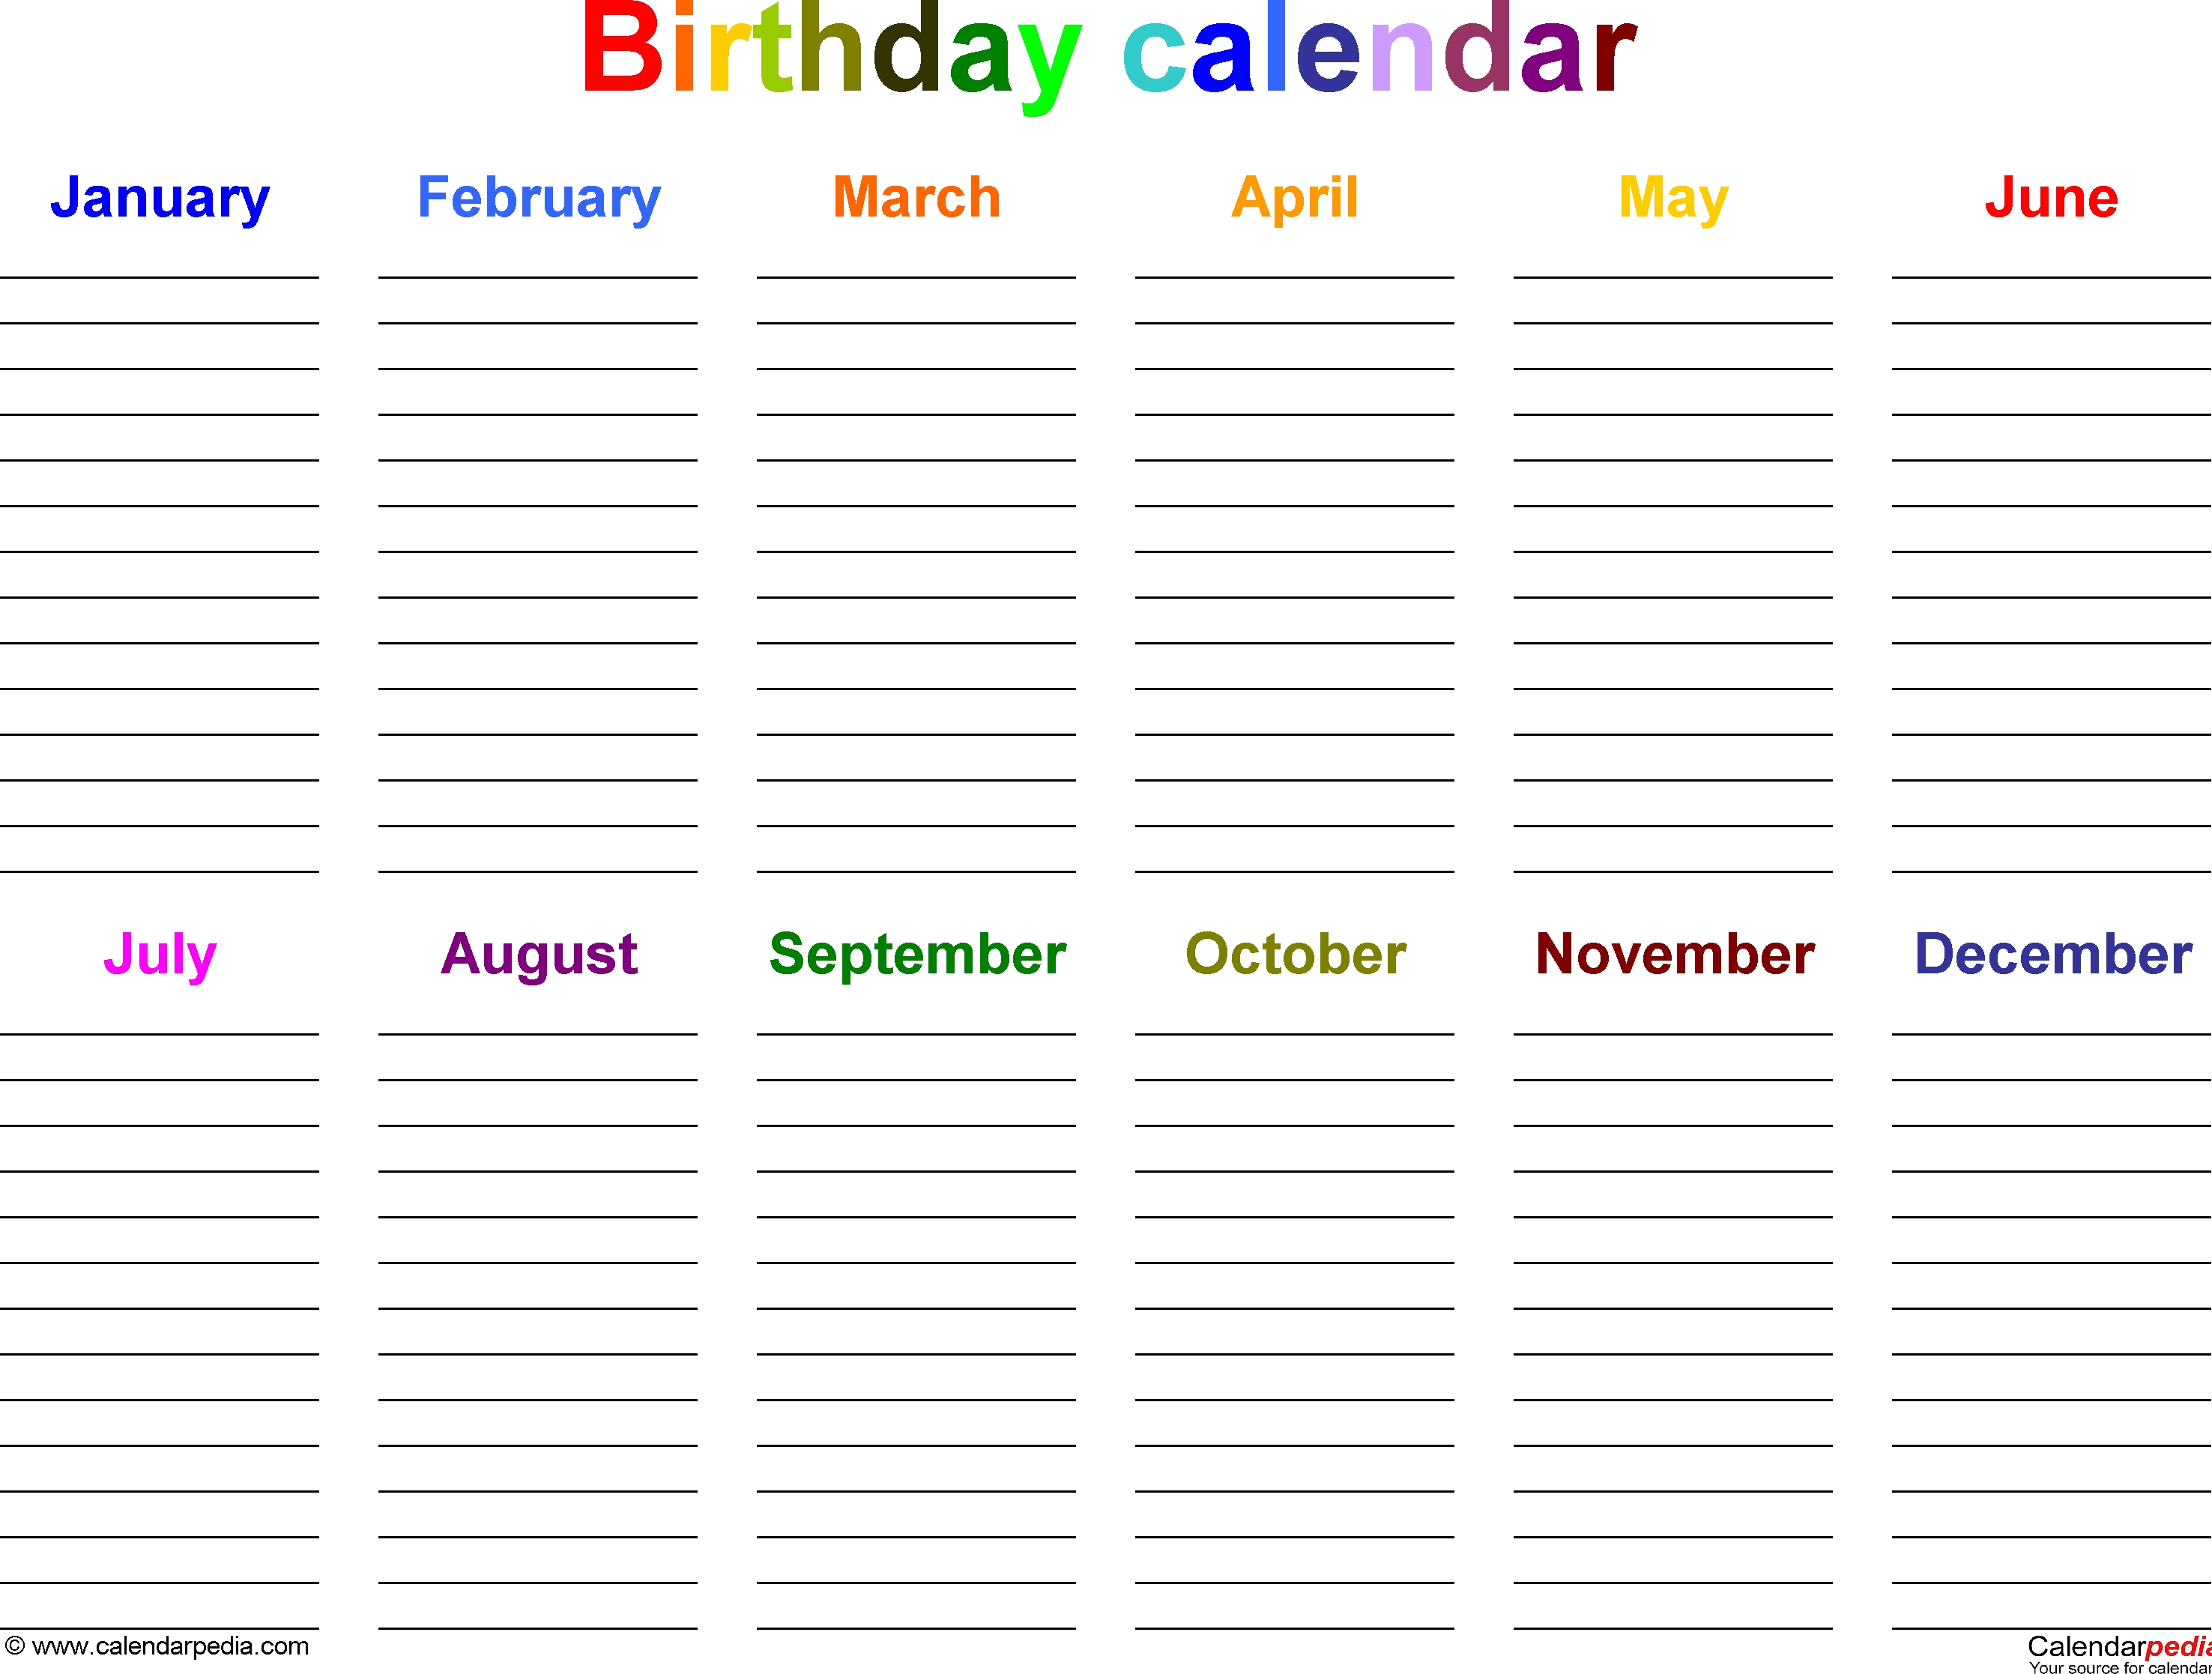 Birthday Calendars - 7 Free Printable Word Templates-Printable Monthly Calendar By Month For 2020 81/2 X 11